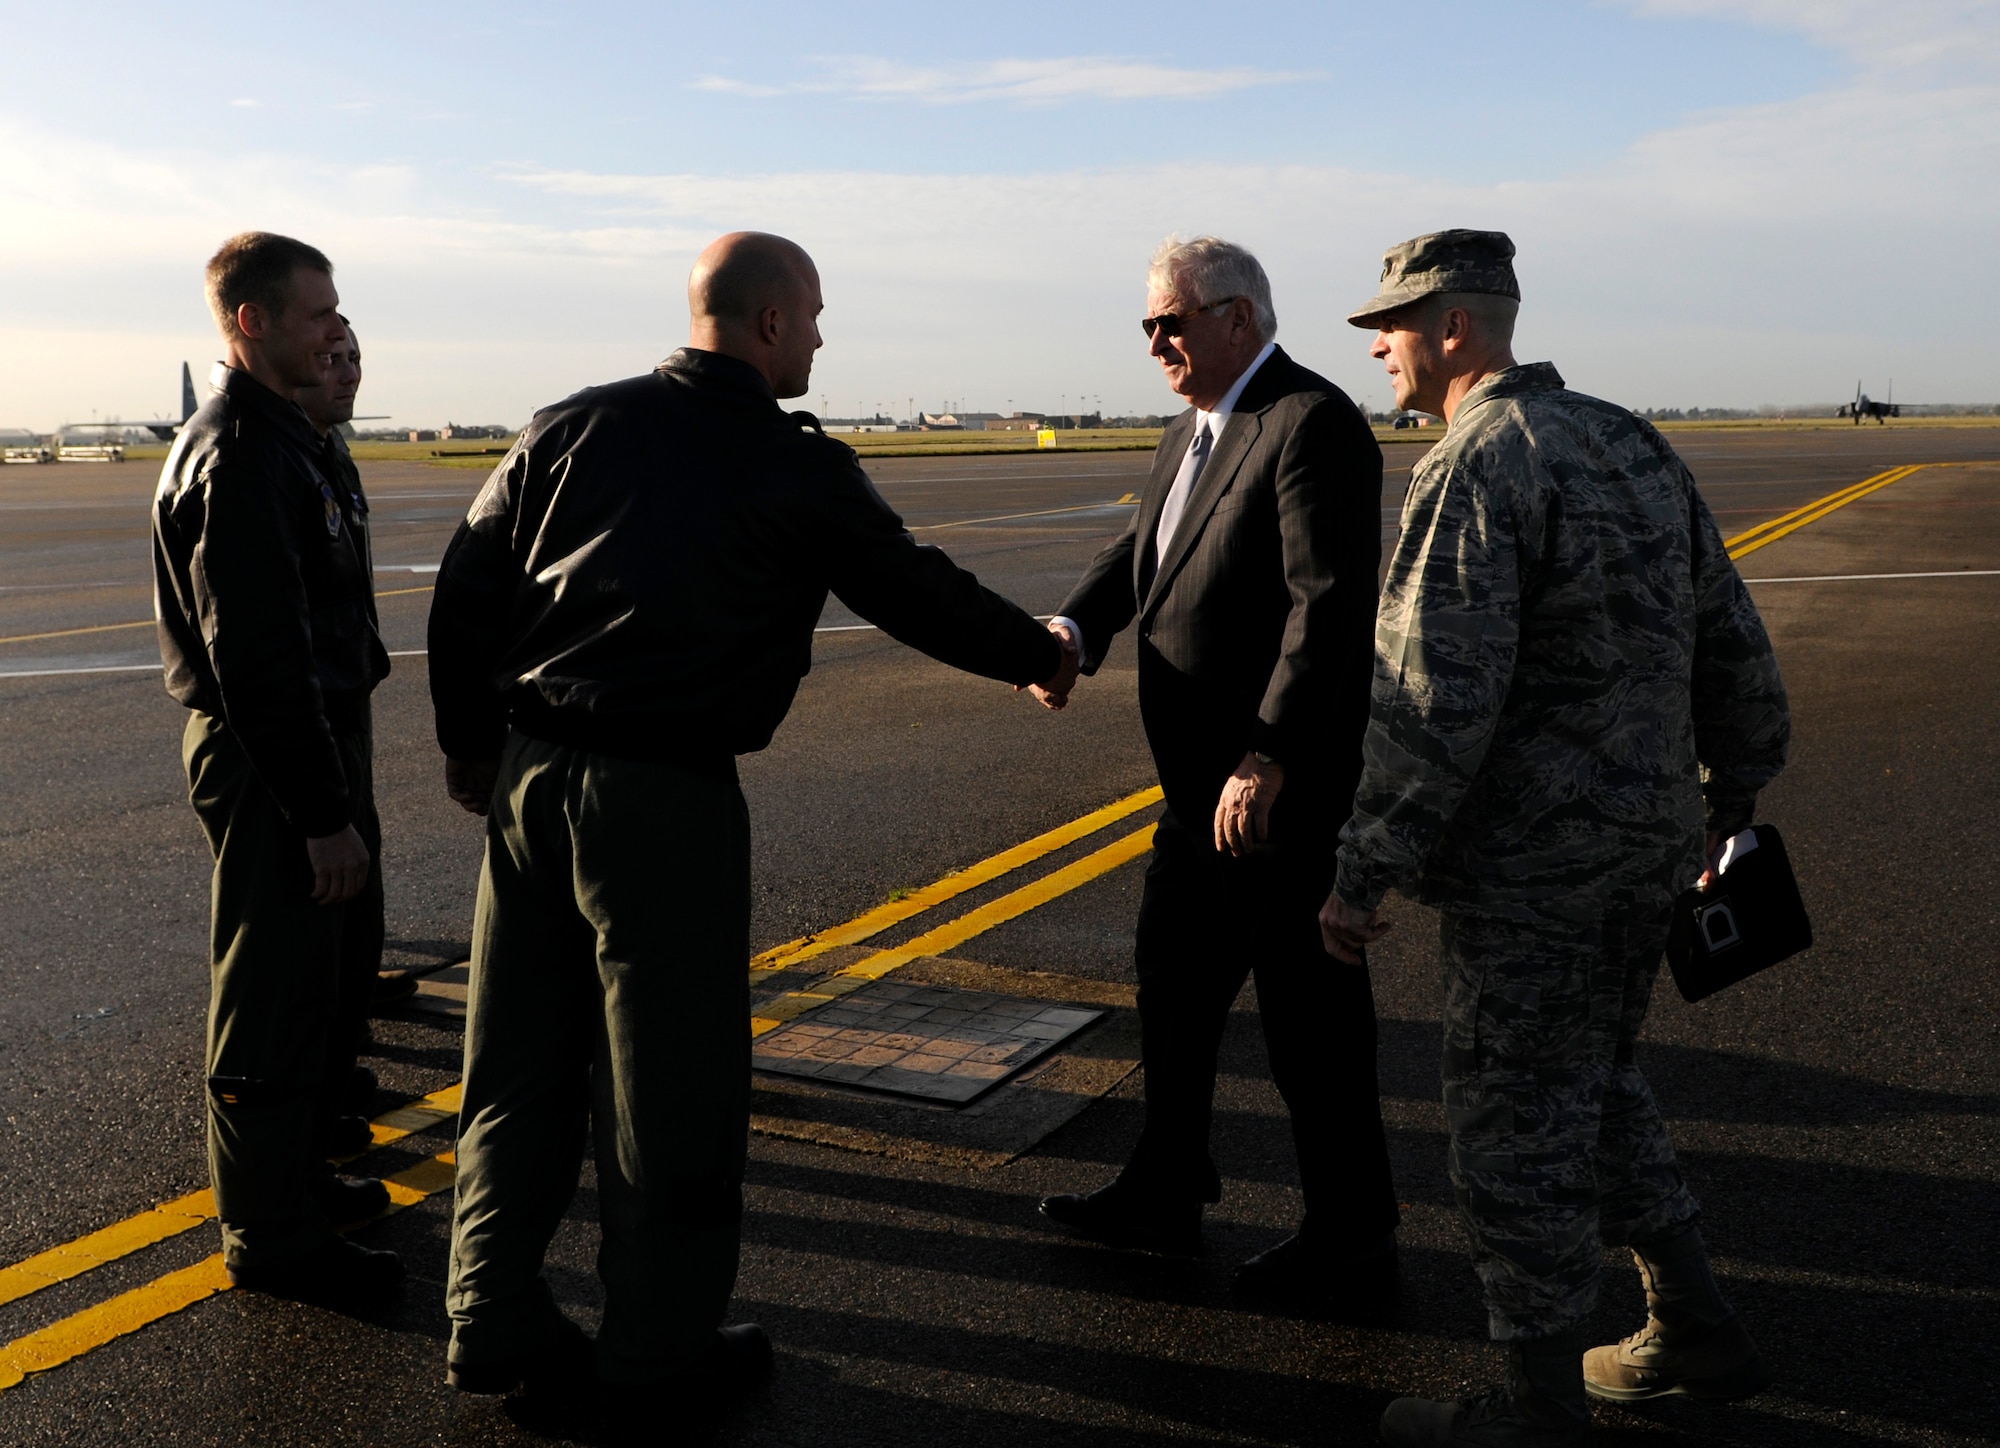 RAF MILDENHALL, England -- Louis Susman, U.S. Ambassador to the U.K., greets the crew of a KC-135 Stratotanker before touring the aircraft Nov. 12.  The aircraft tour was part of a larger tour of RAFs Mildenhall and Lakenheath.  (U.S. Air Force photo/Staff Sgt. Christopher L. Ingersoll)